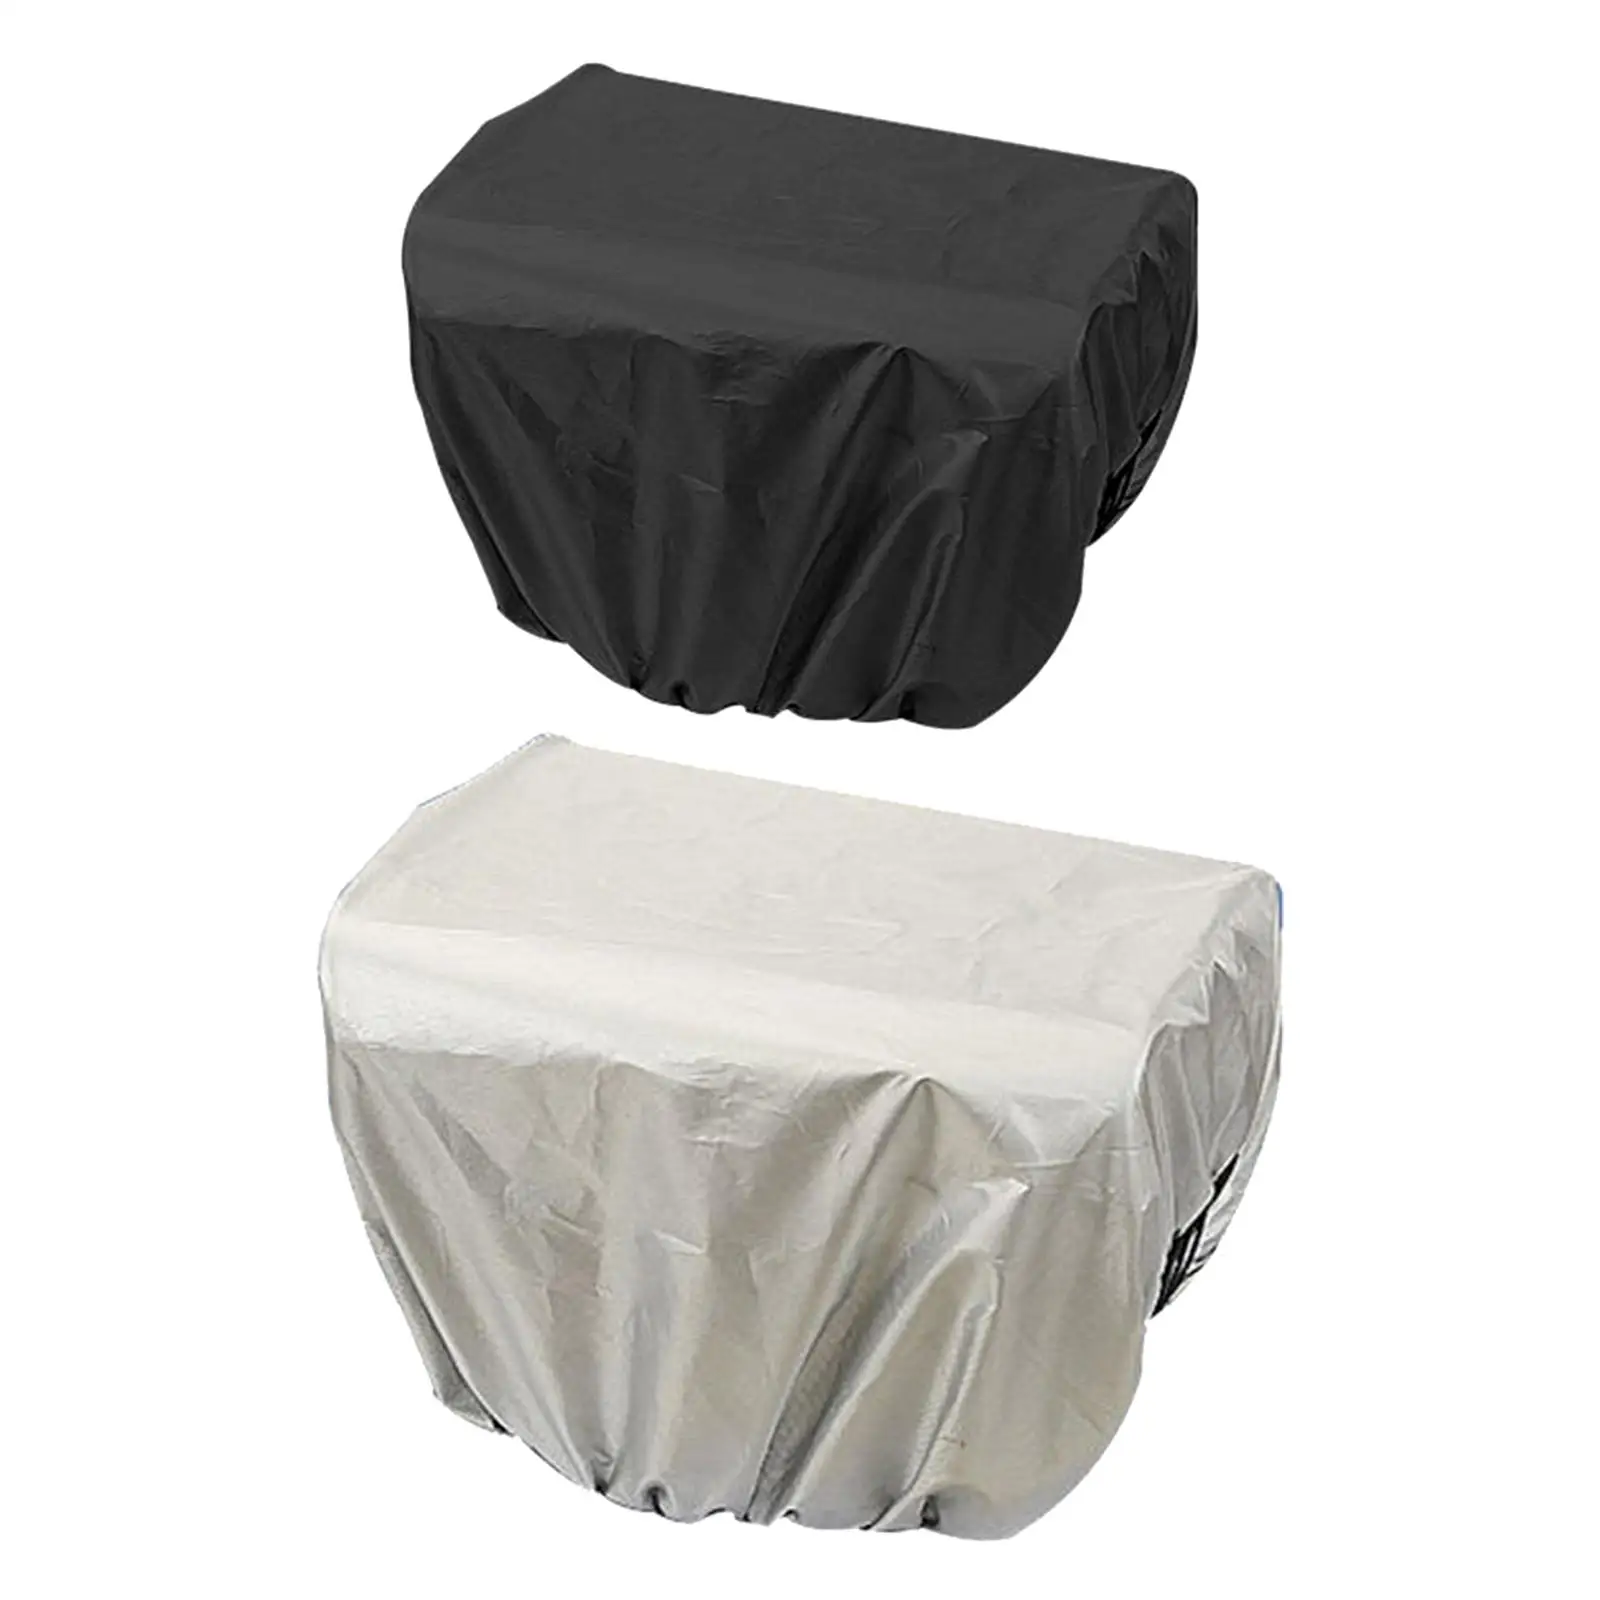 Bike Basket Cover Dustproof for Most Baskets Tricycles Motorcycles